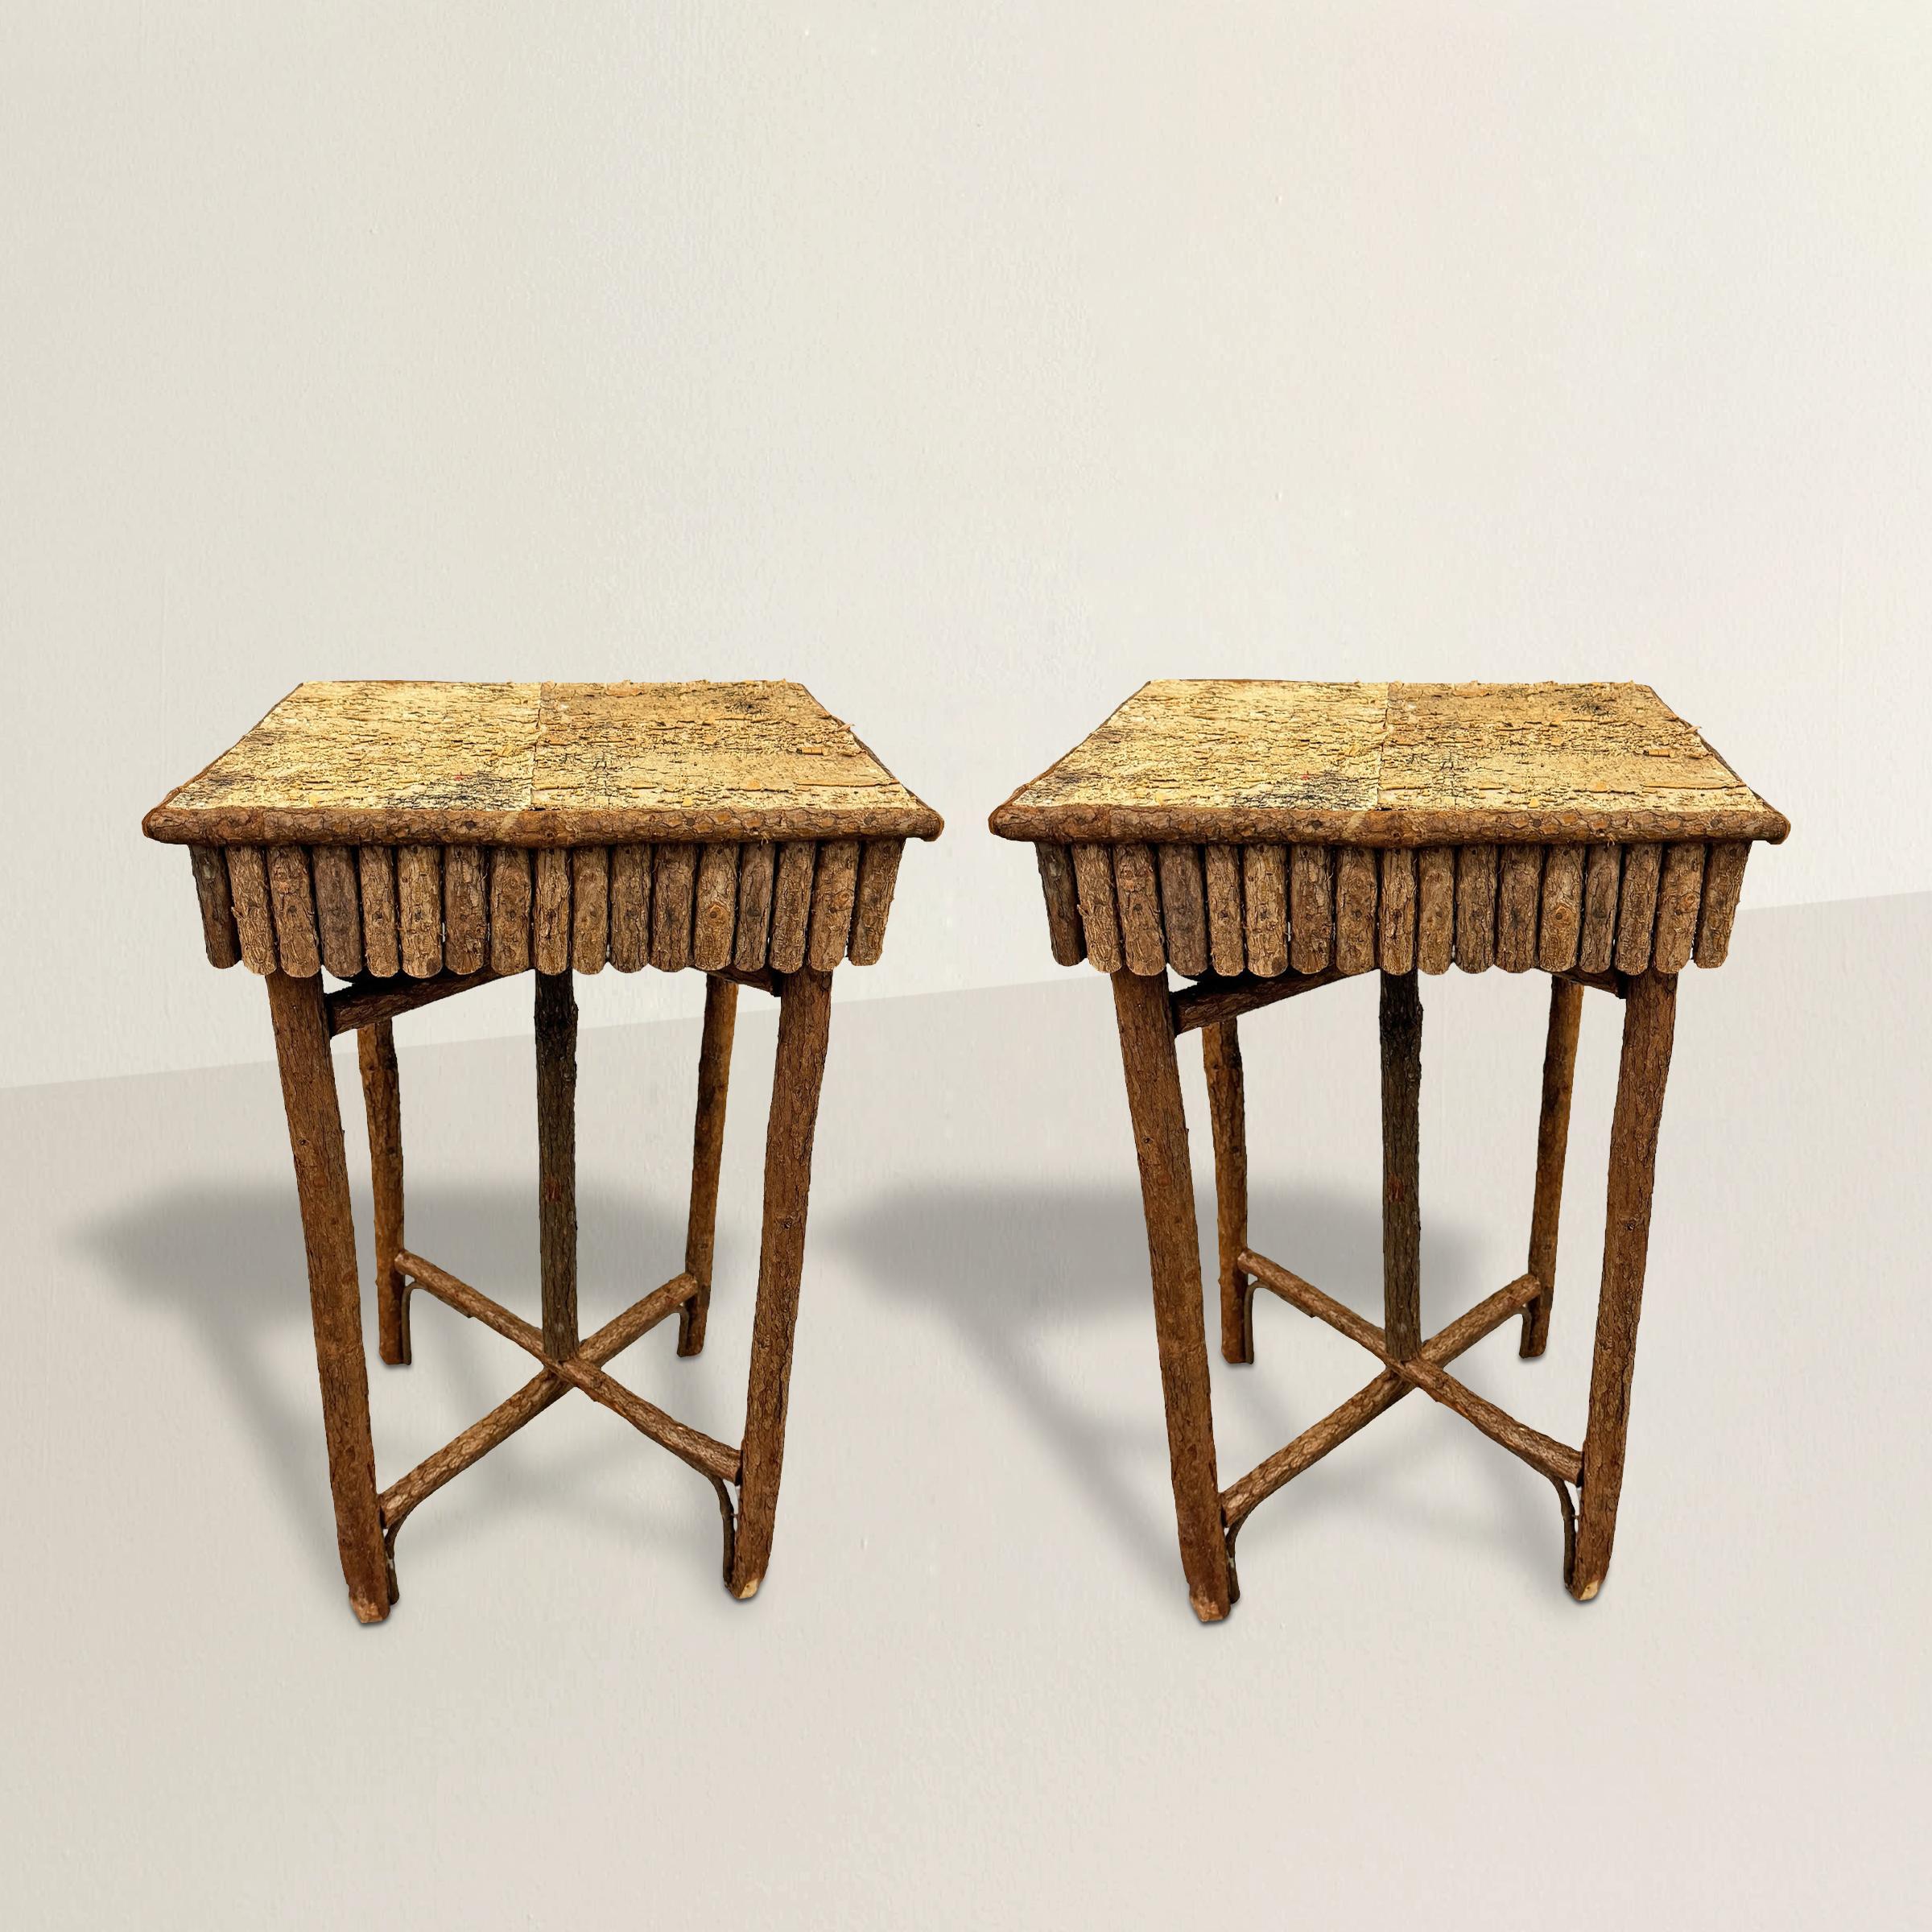 These charming 20th century American Adirondack style side tables embody the rustic allure of the Adirondack region, with aprons and legs crafted from hickory branches. Their tops, adorned with the timeless beauty of birch bark, evoke a sense of